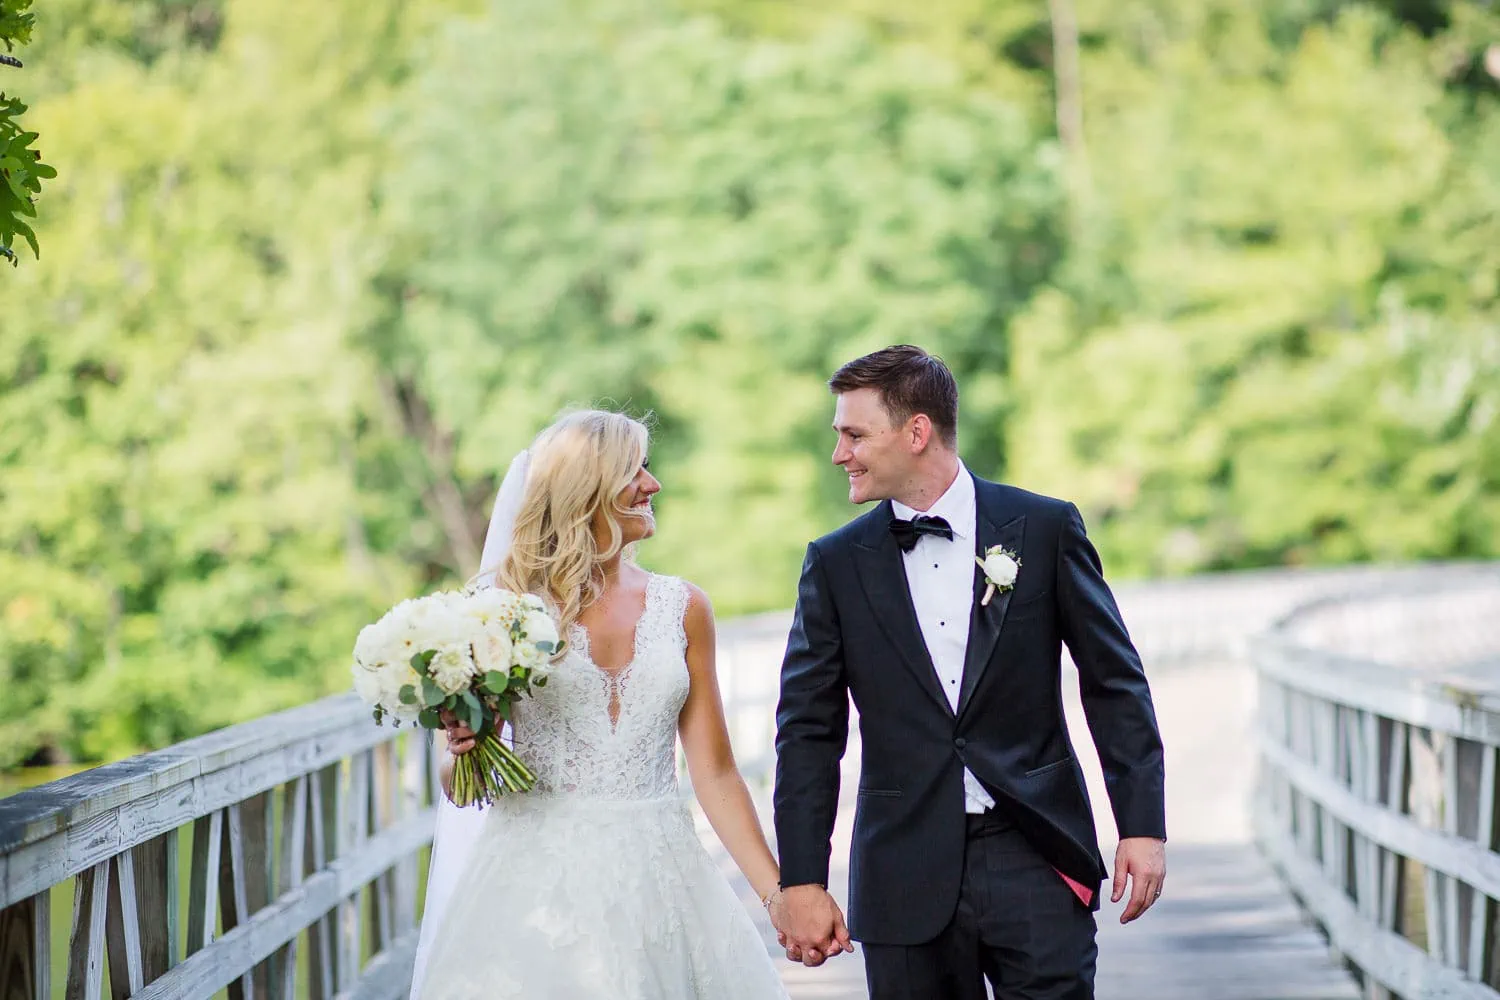 A bride and groom walking hand and hand smiling at each other on a wooden boardwalk